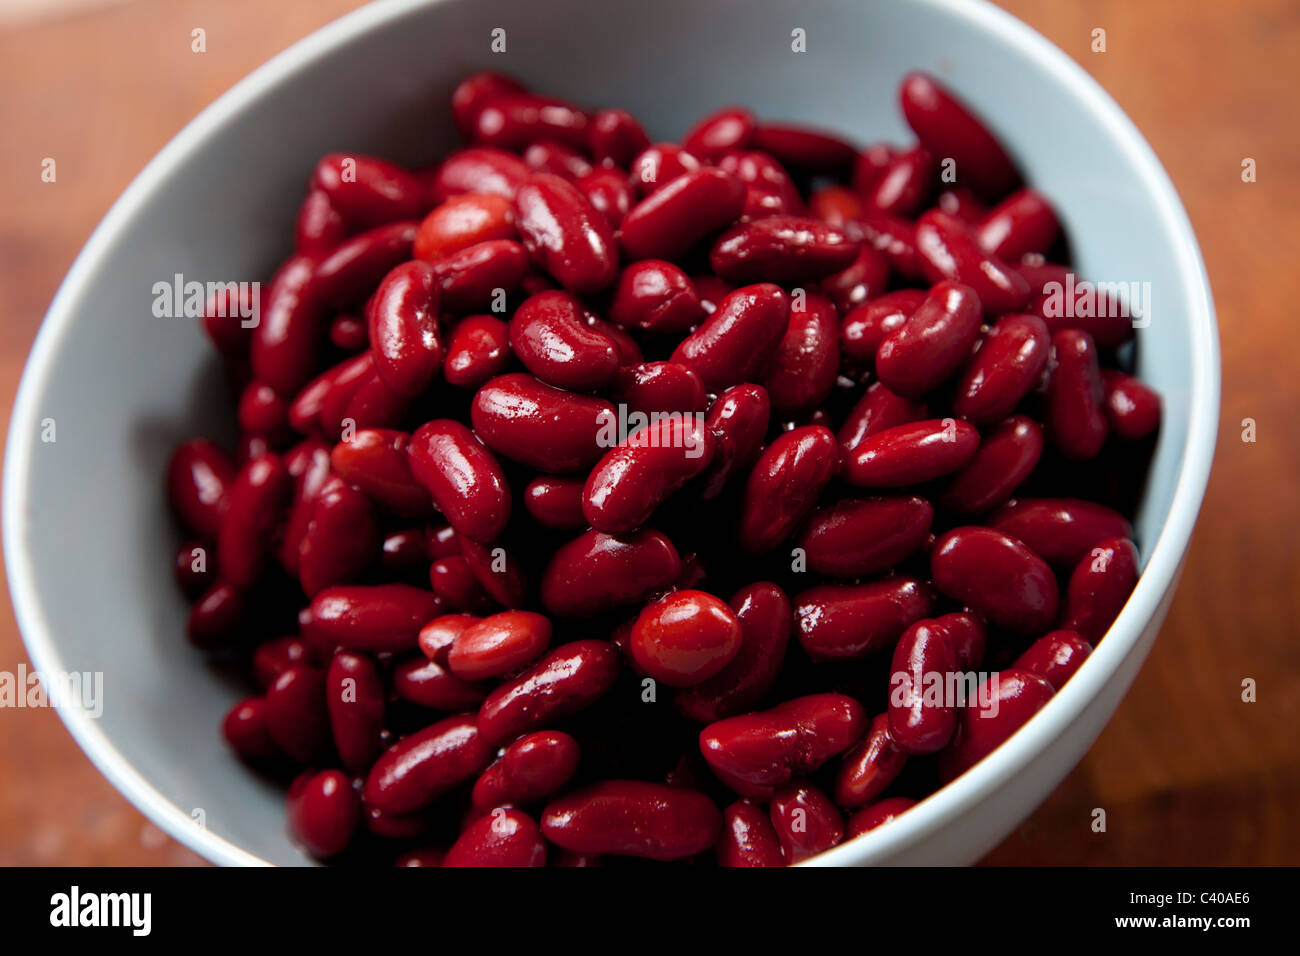 Kidney Beans in a blue bowl Stock Photo